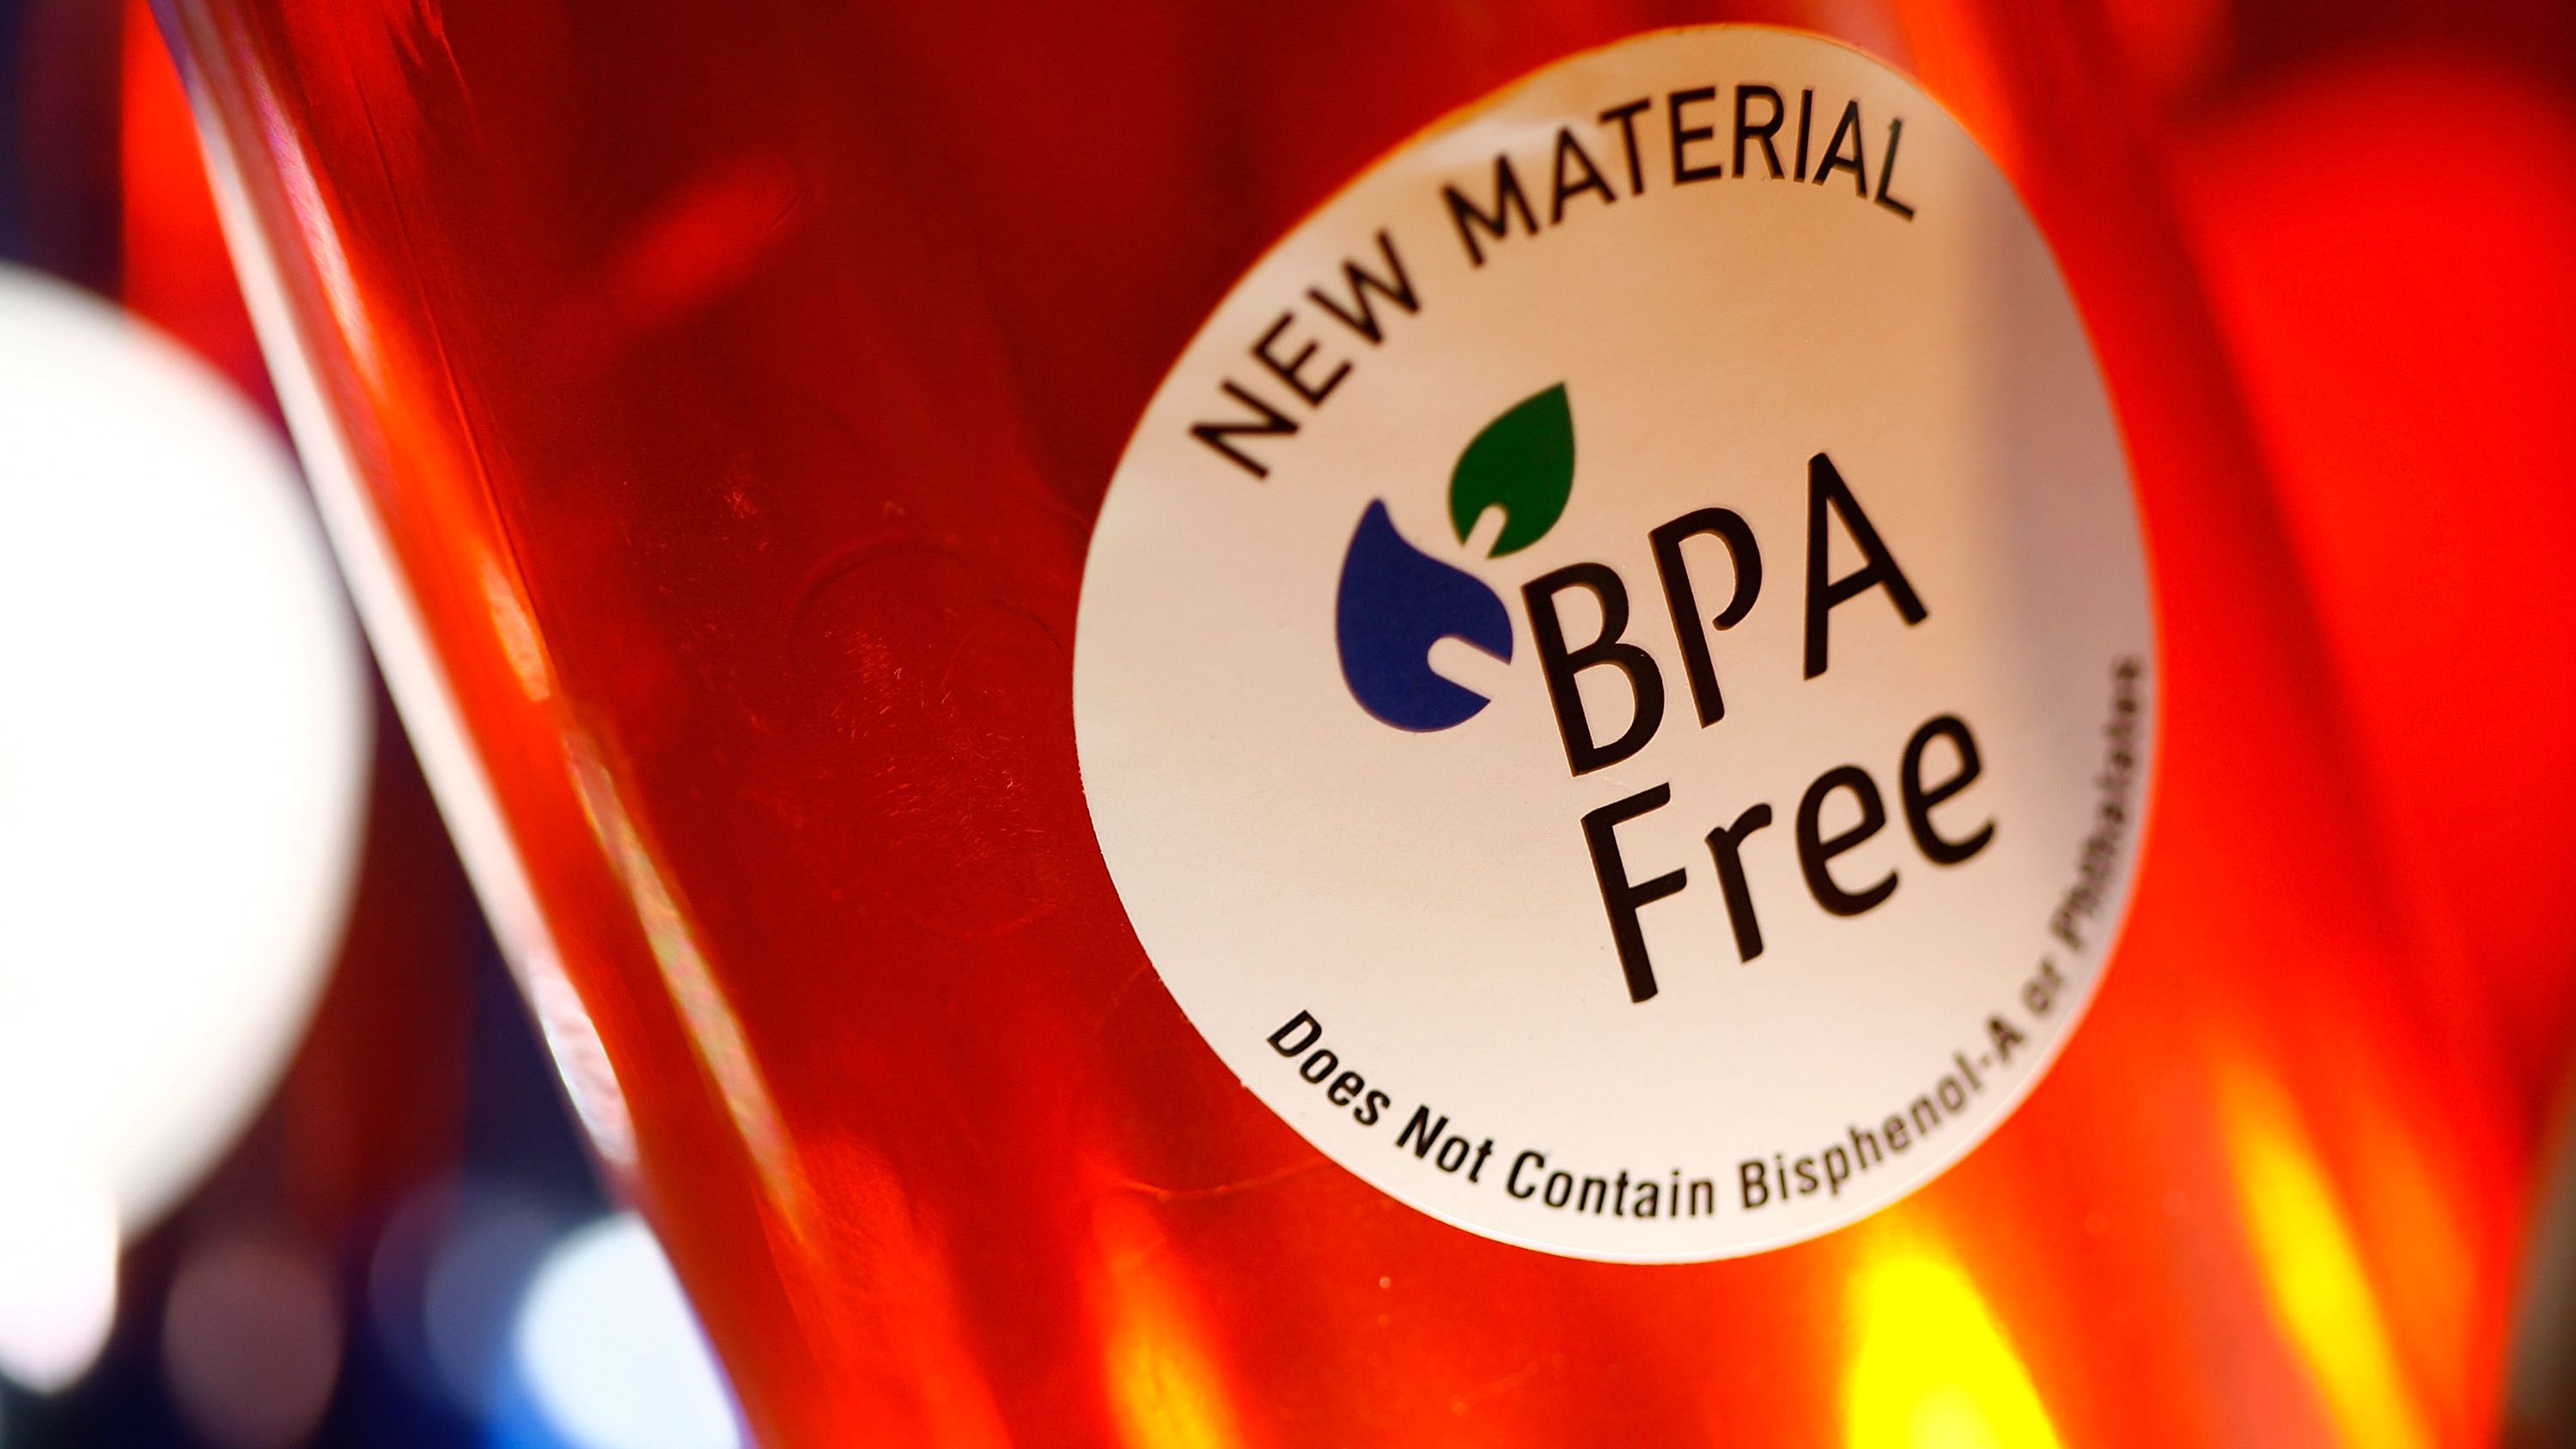 The FDA was asked in a 2008 petition to regulate the use of BPA in human food and food packaging.